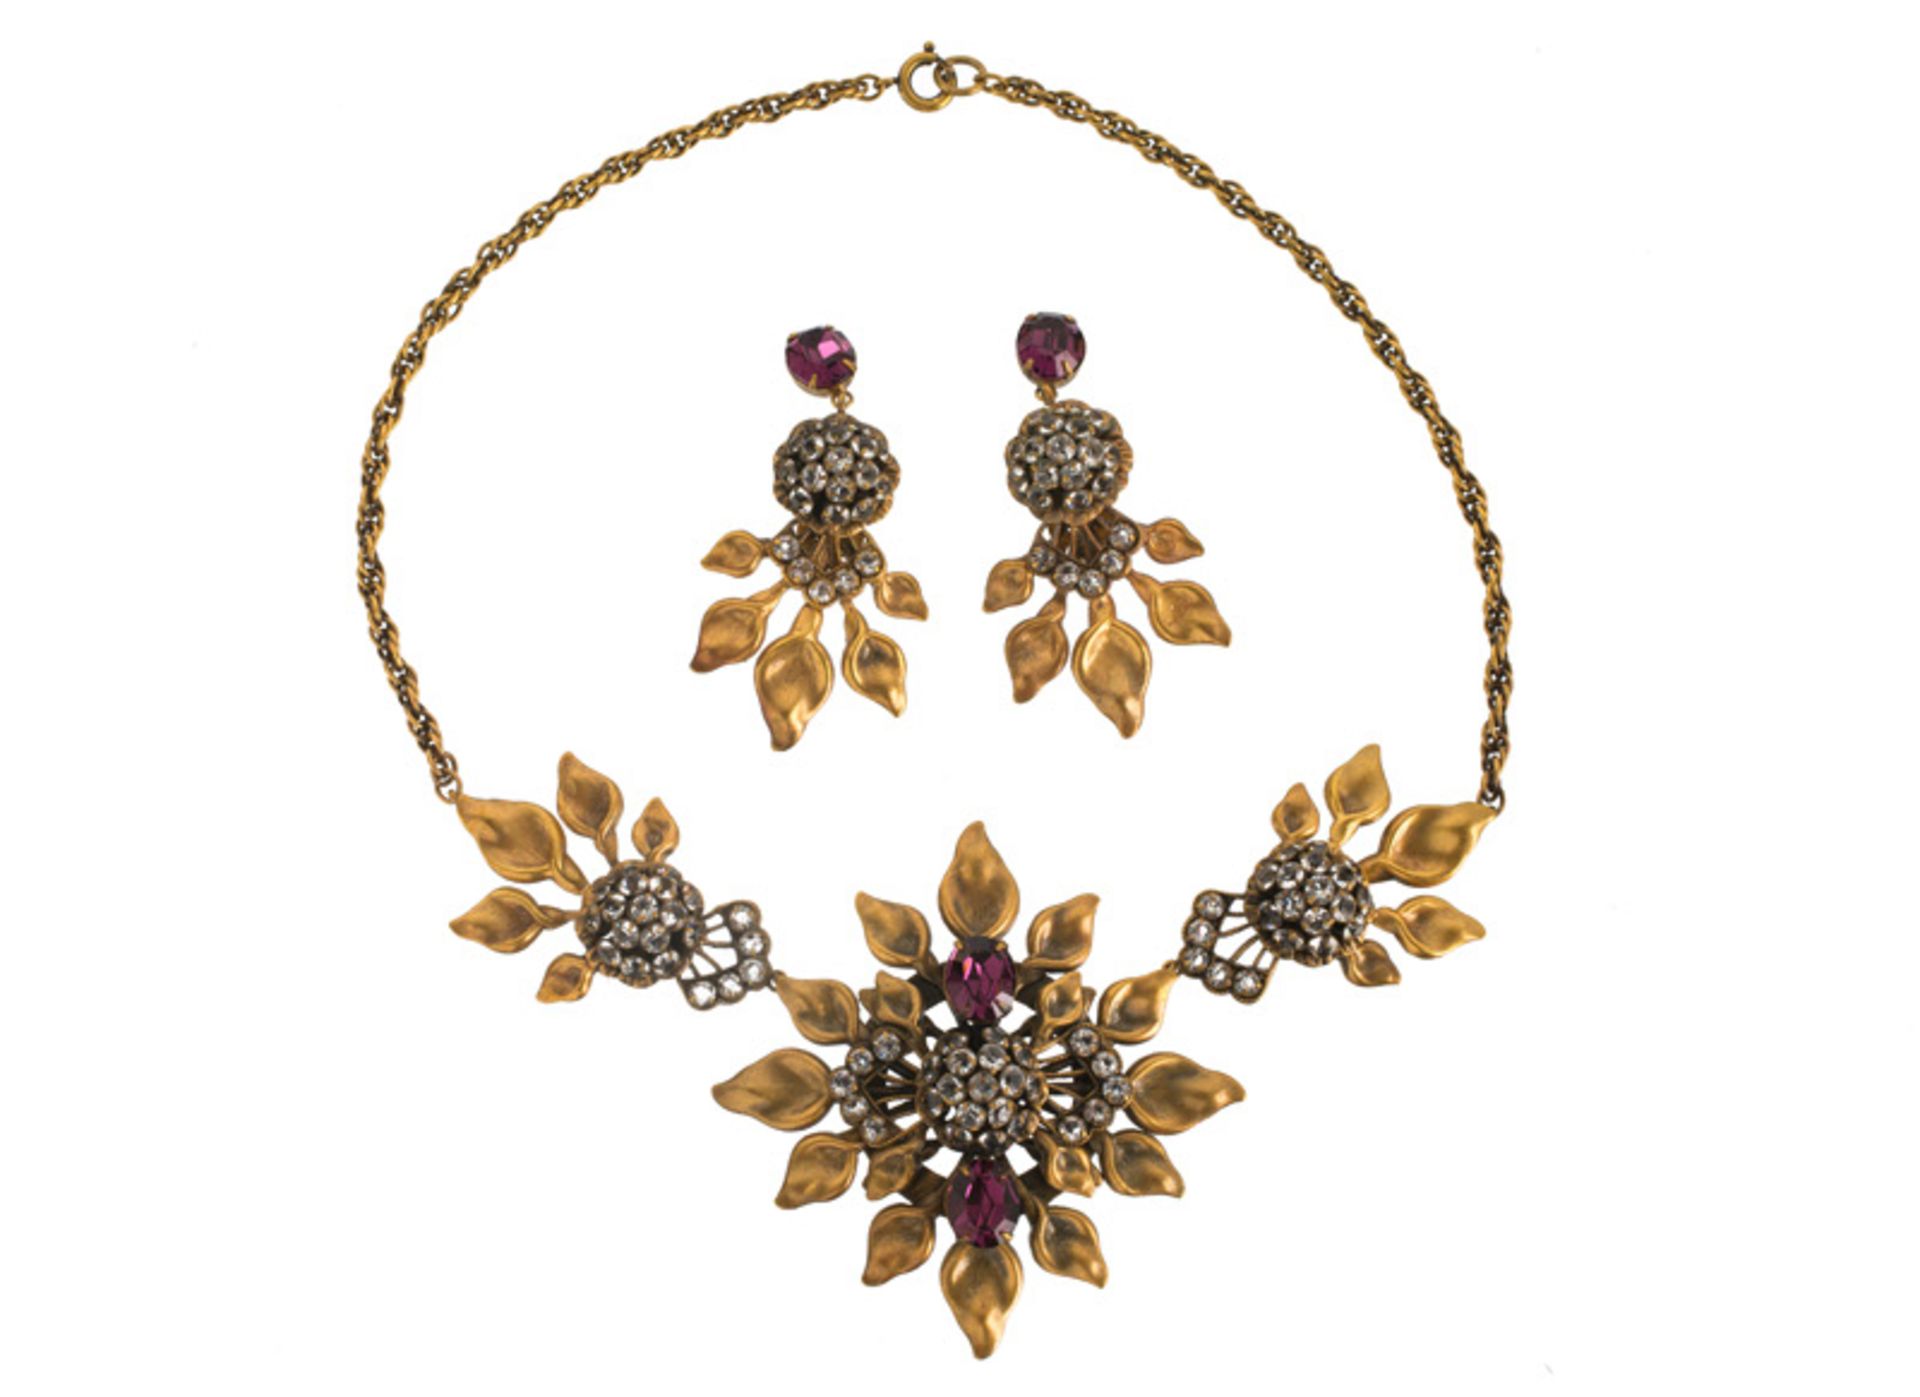 A Joseff Hollywood goldtone necklace and pair of earclips, set with purple stones and rhinestones. - Image 2 of 2